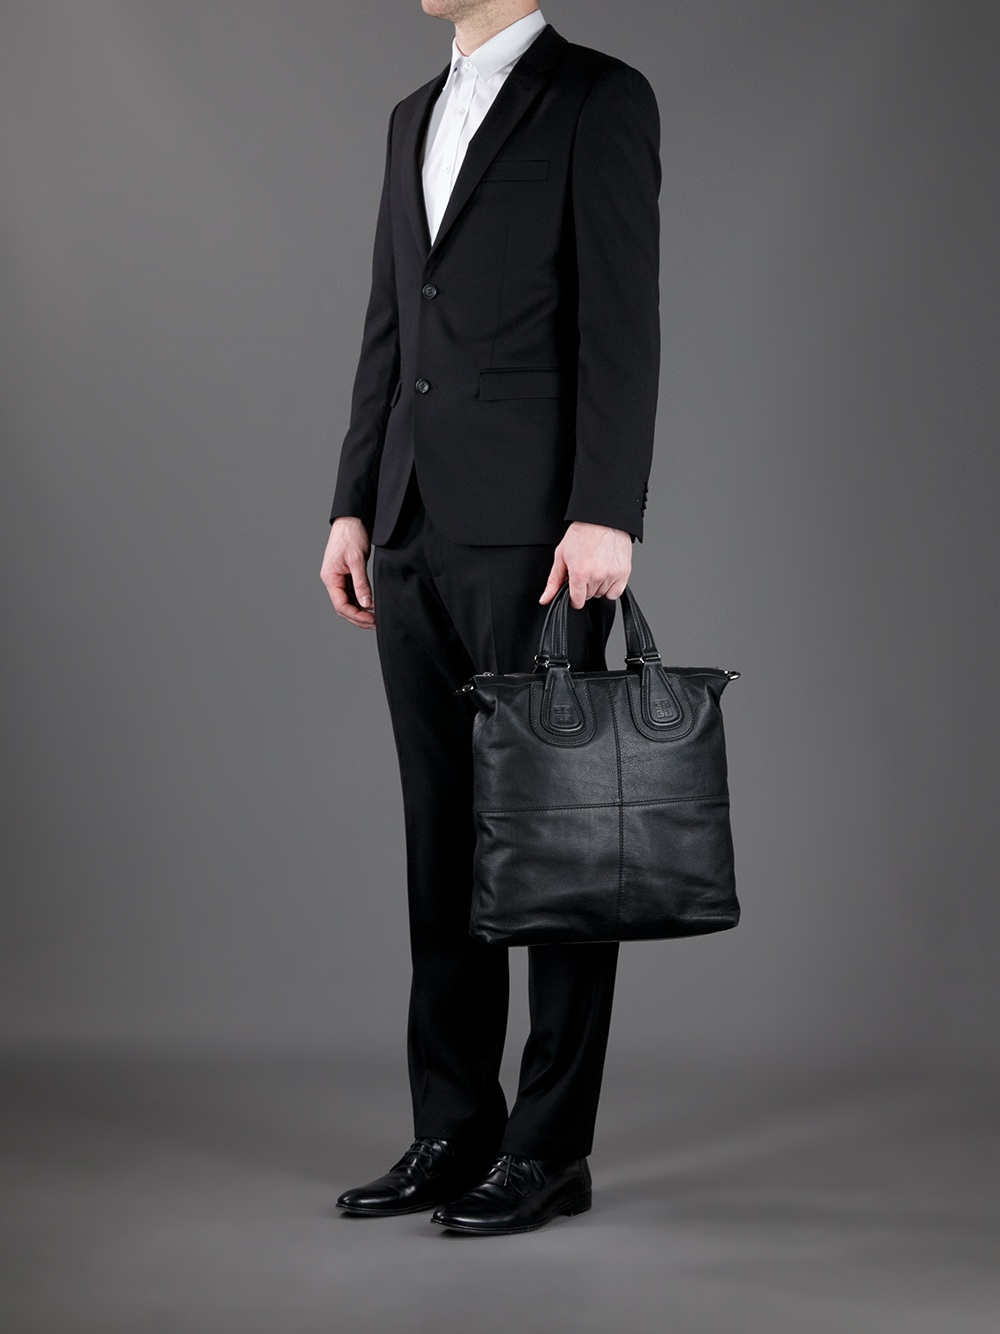 Givenchy Tote Bag in Black for Men | Lyst